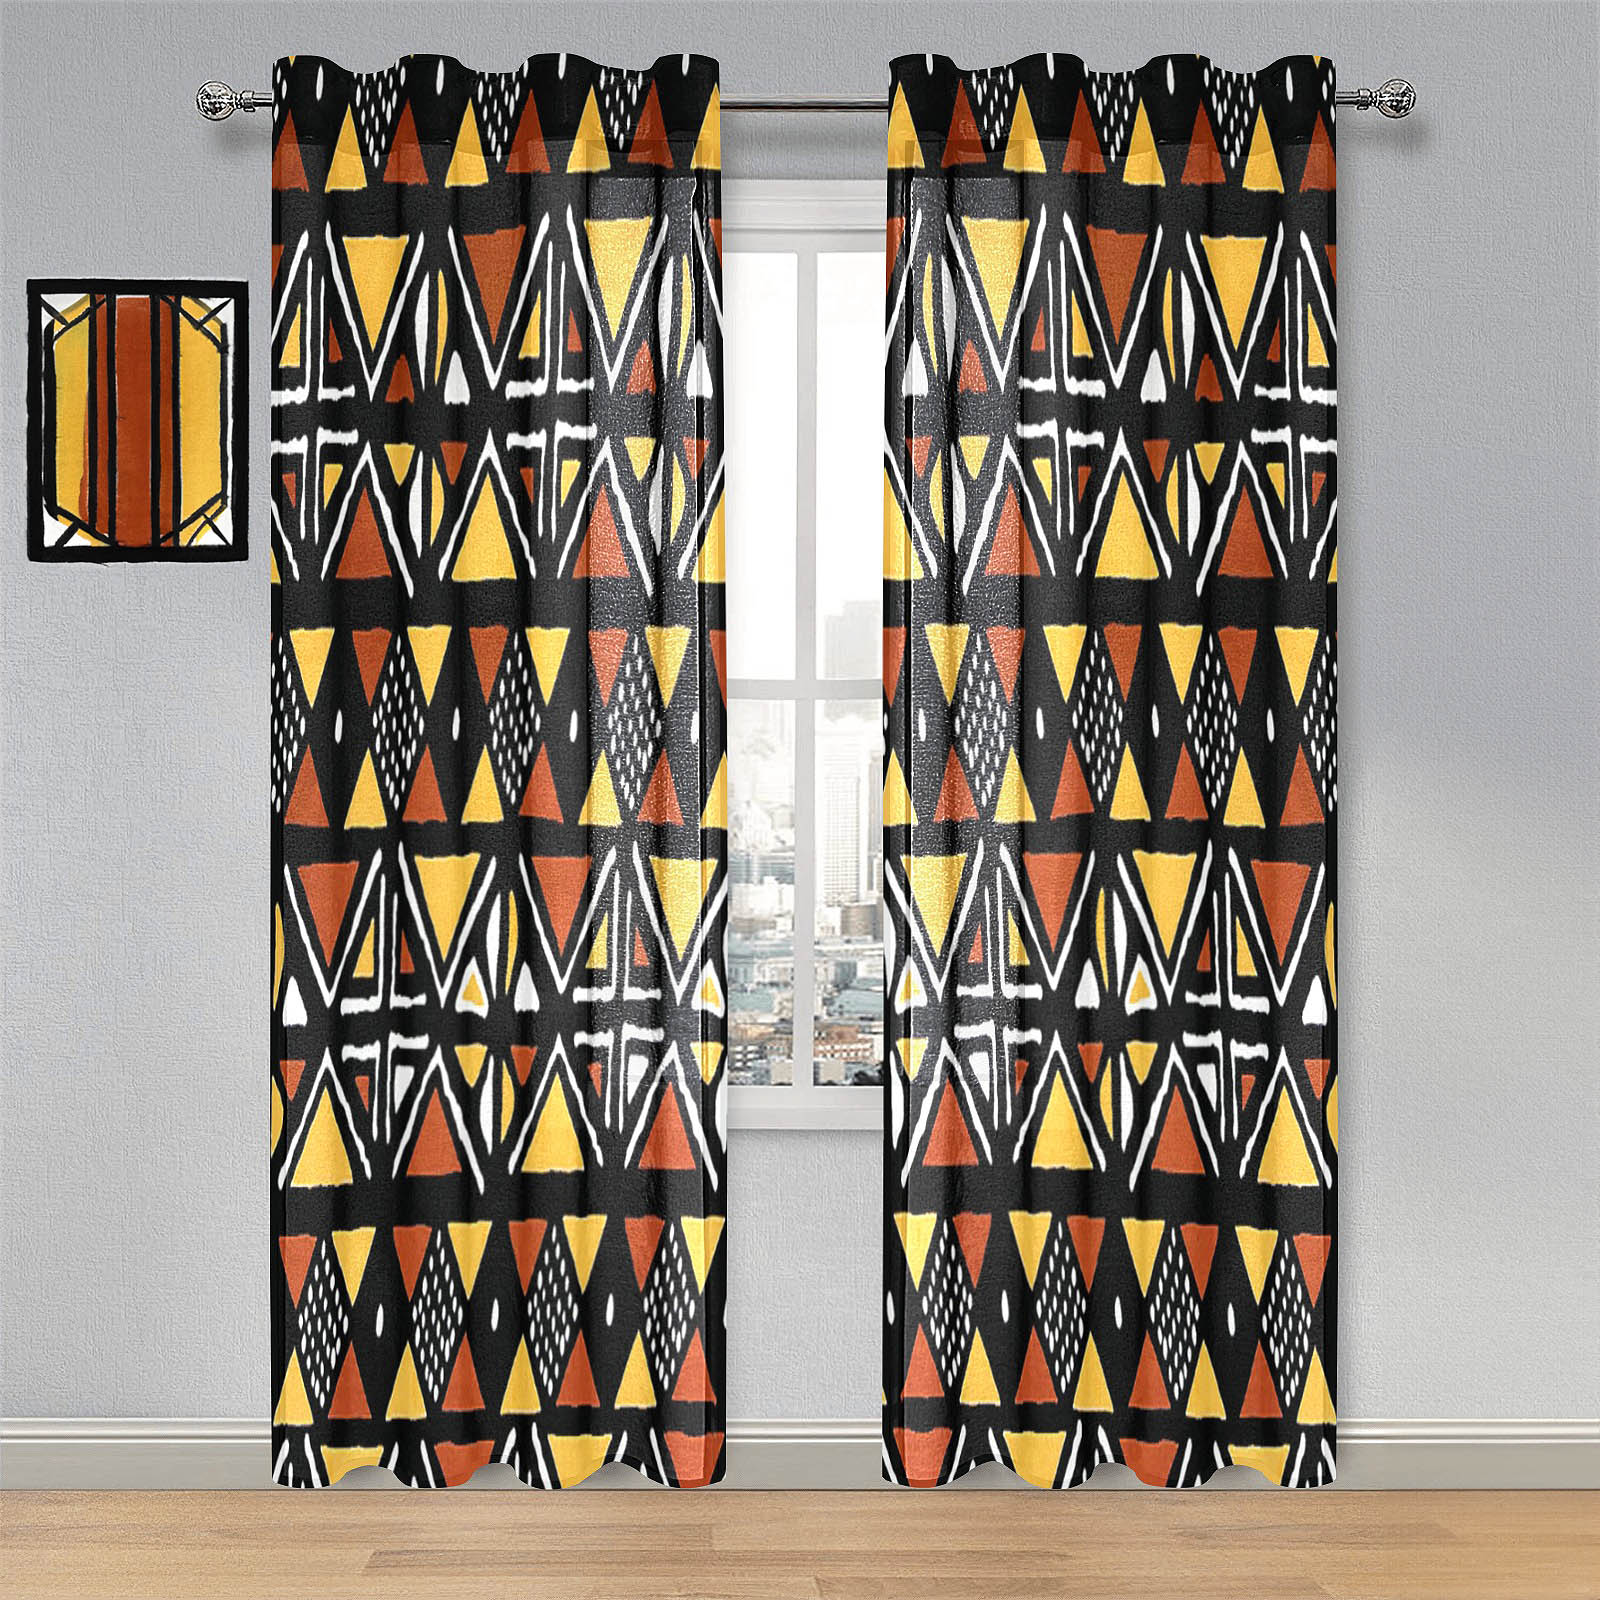 Mixed African Gauze Curtain Mudcloth Print (Two Piece)